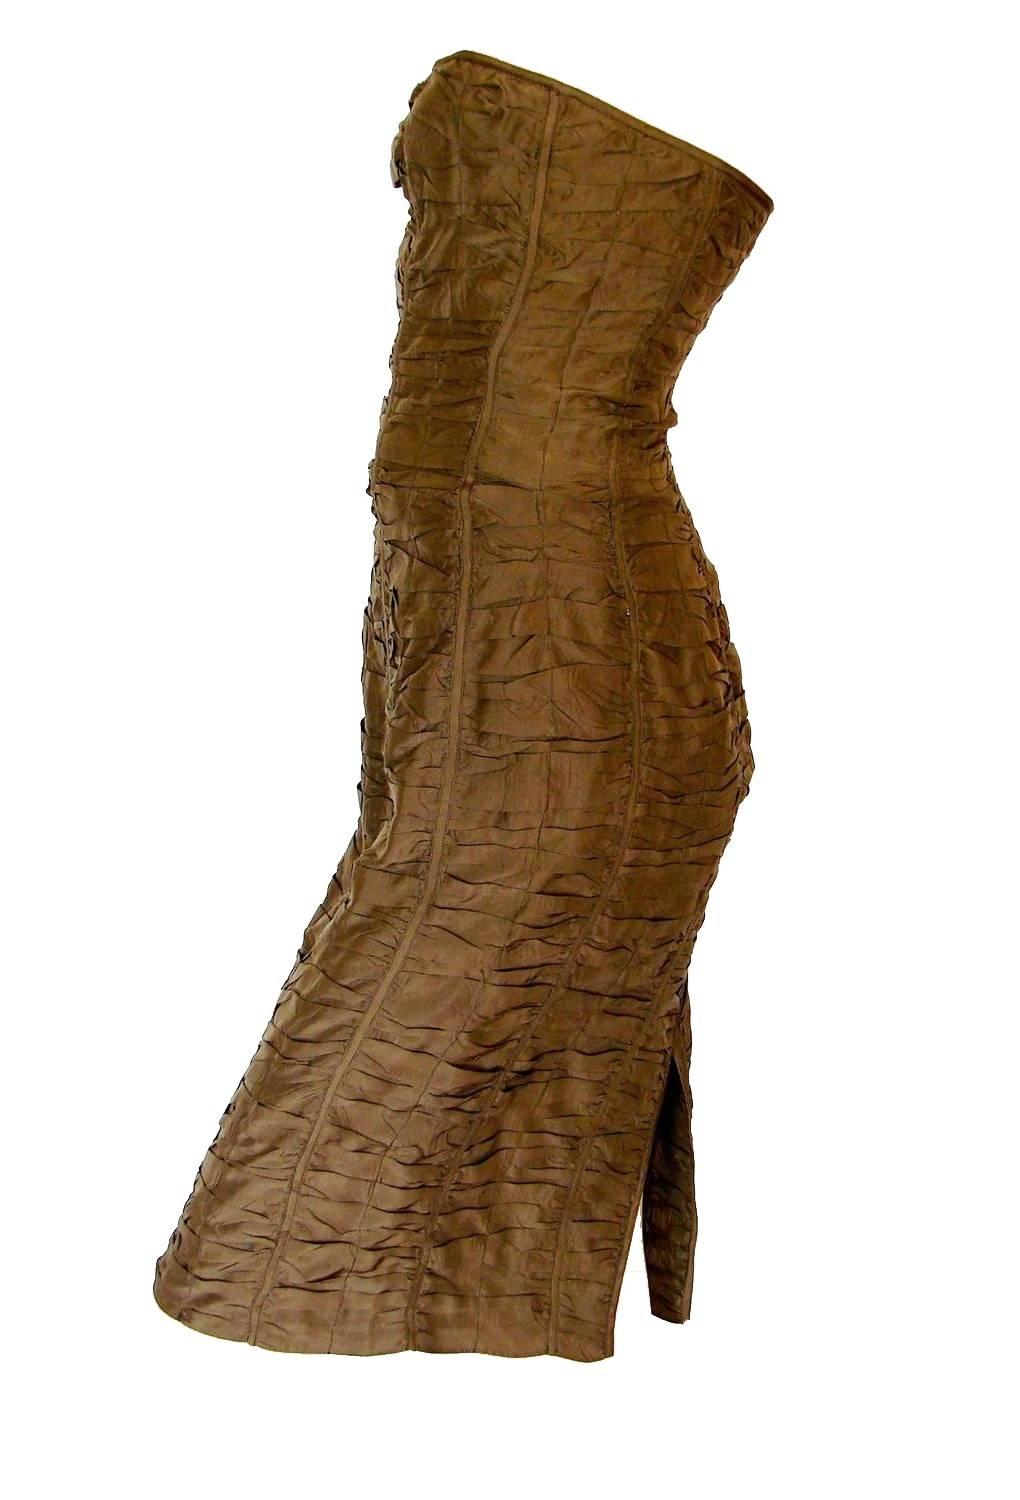 BEAUTIFUL OLIVE GREEN KHAKI BODYCON CORSET RUCHED DRESS
FROM TOM FORD'S SPRING 2001 COLLECTION FOR GUCC

THIS GUCCI SIGNATURE PIECE WAS SOLD OUT IMMEDIATELY
IT WAS FEATURED IN THE GUCCI RUNWAY SHOW AND MANY MAGAZINES


DETAILS:

    Amazing GUCCI